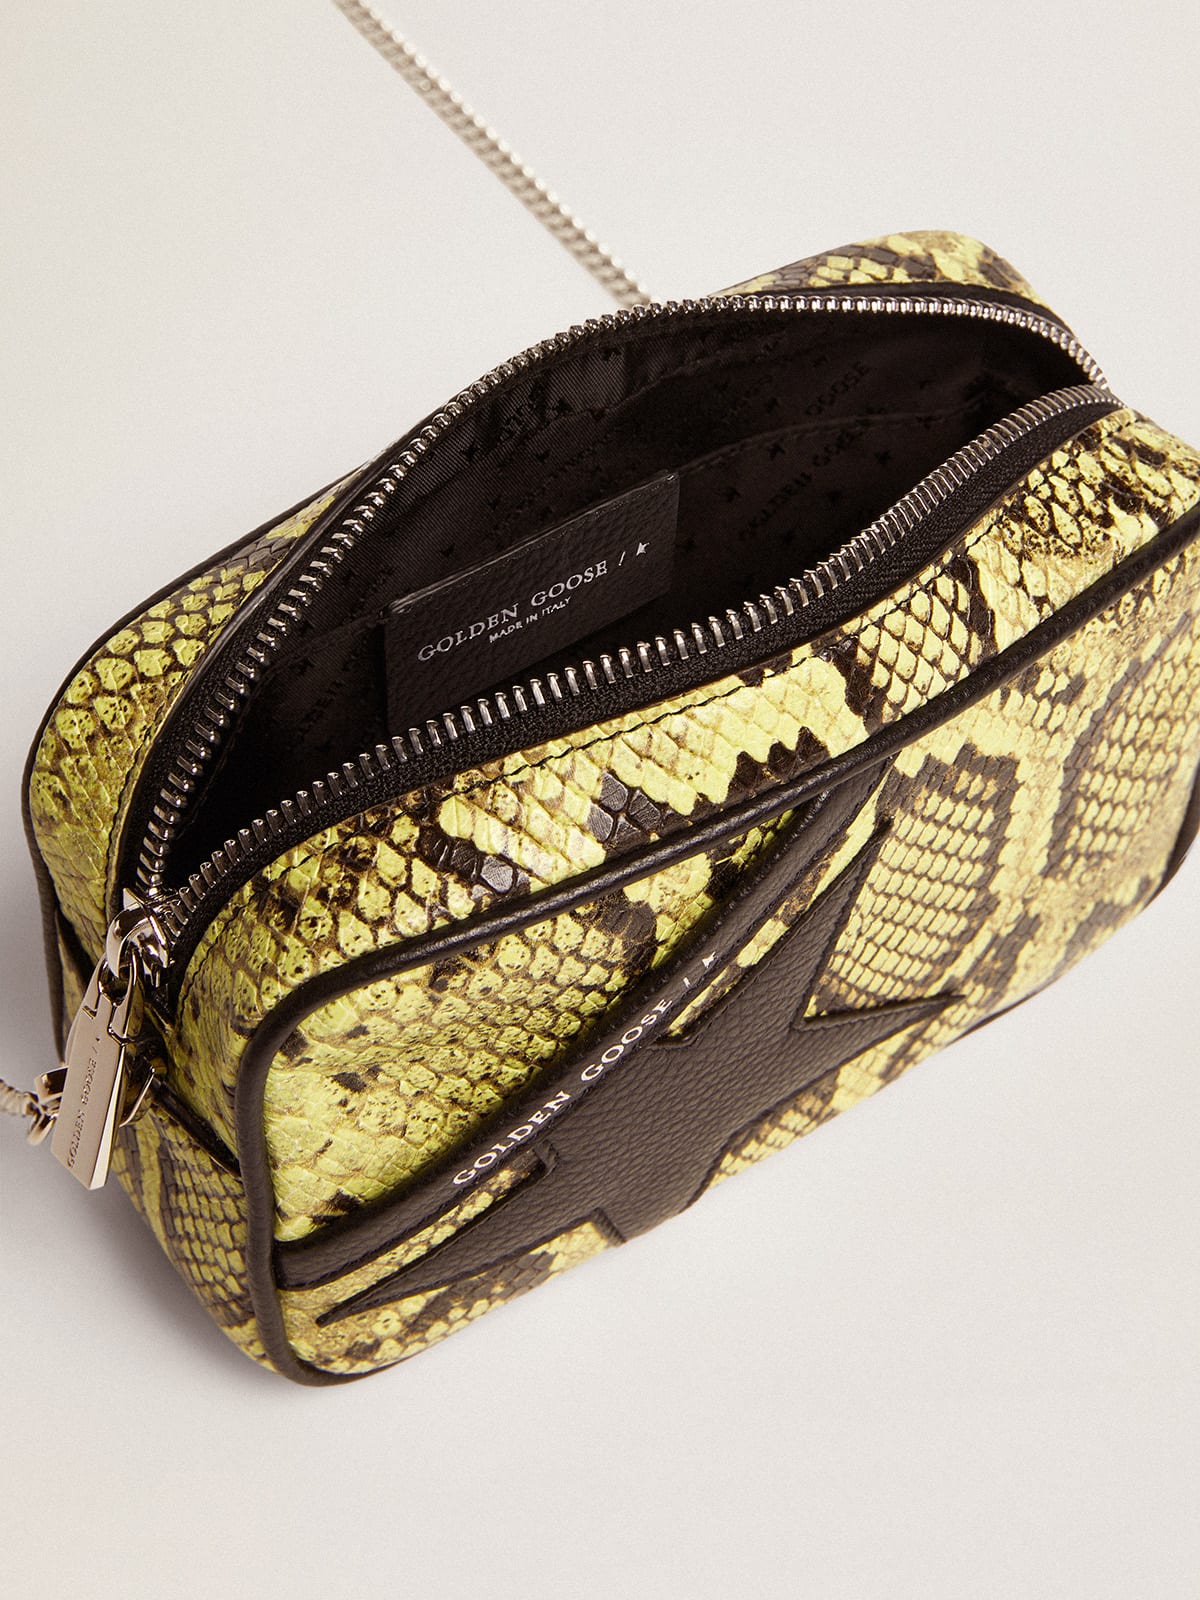 Golden Goose - Mini Star Bag in lime-colored snake-print leather with black leather star in 